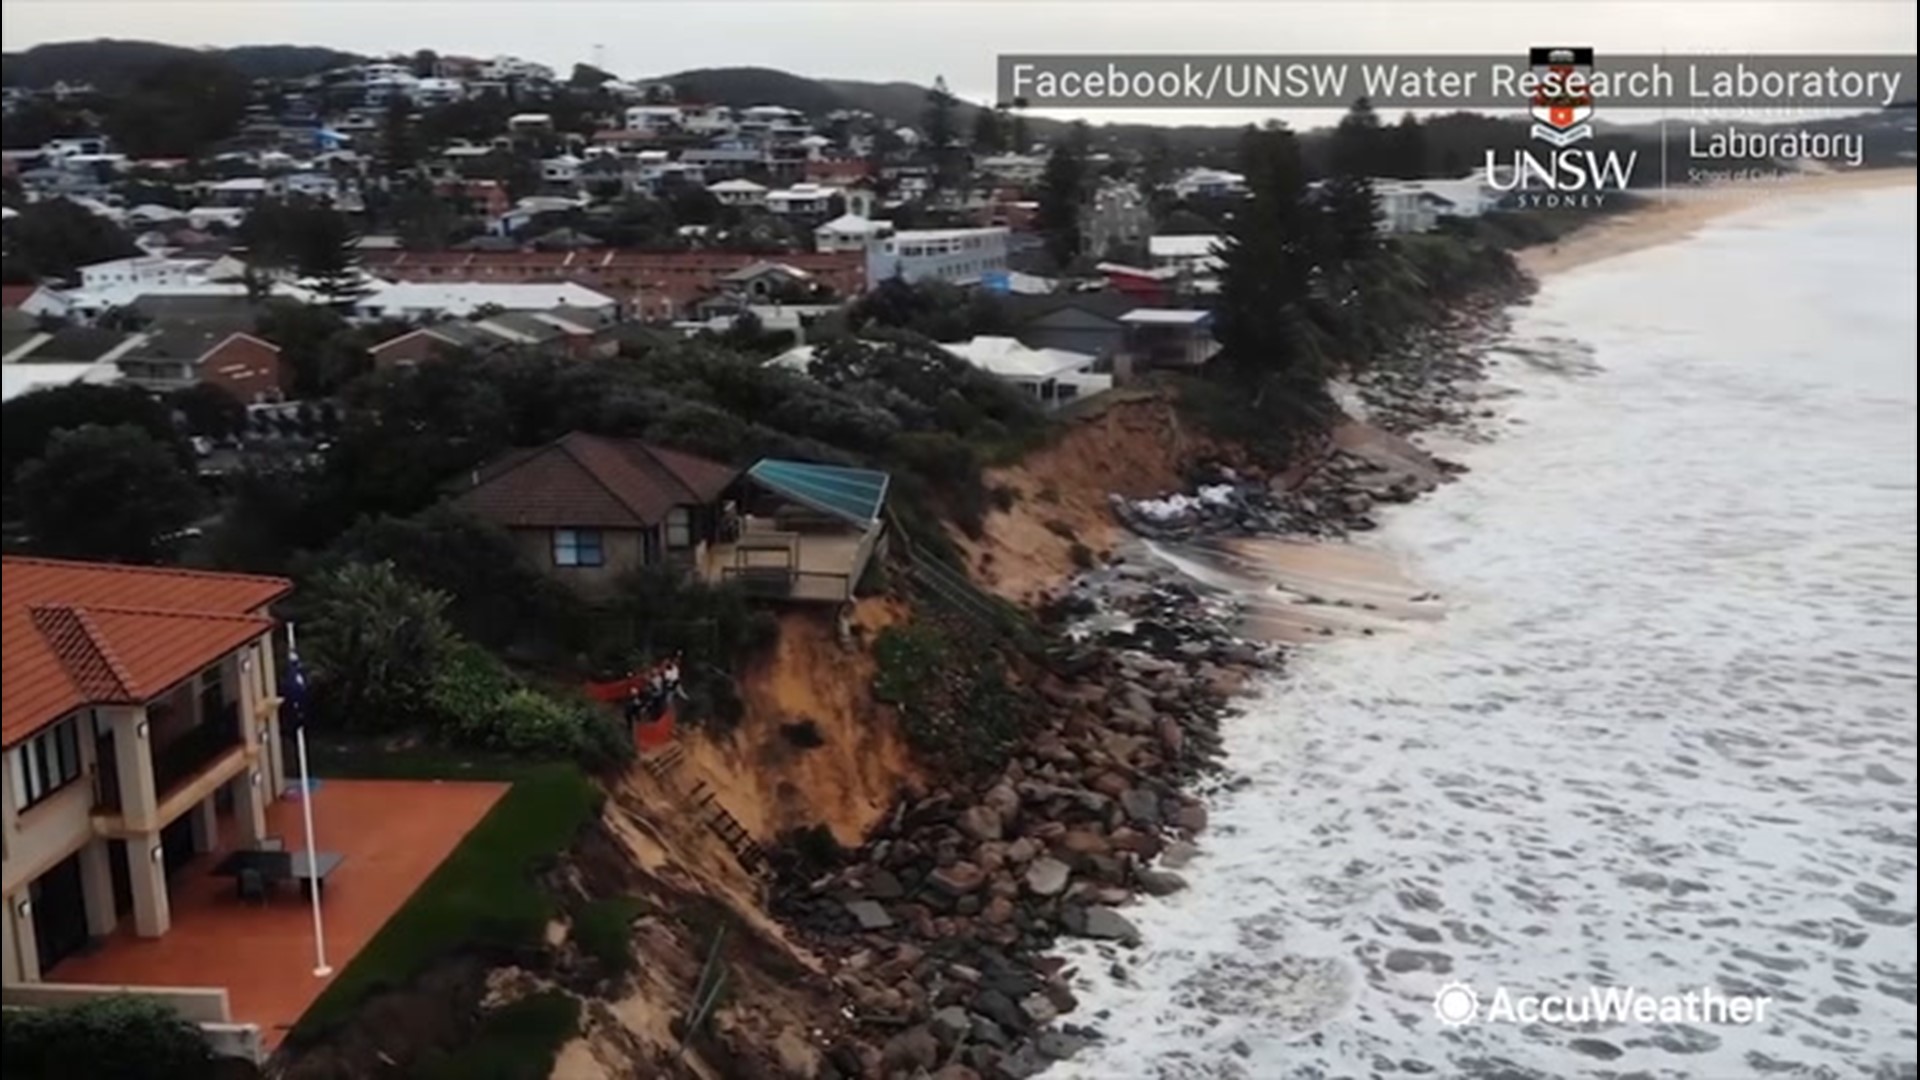 Residents of several homes along the shore in Central Coast, New South Wales, evacuated as beach erosion caused their homes to be at risk for collapse on July 17.